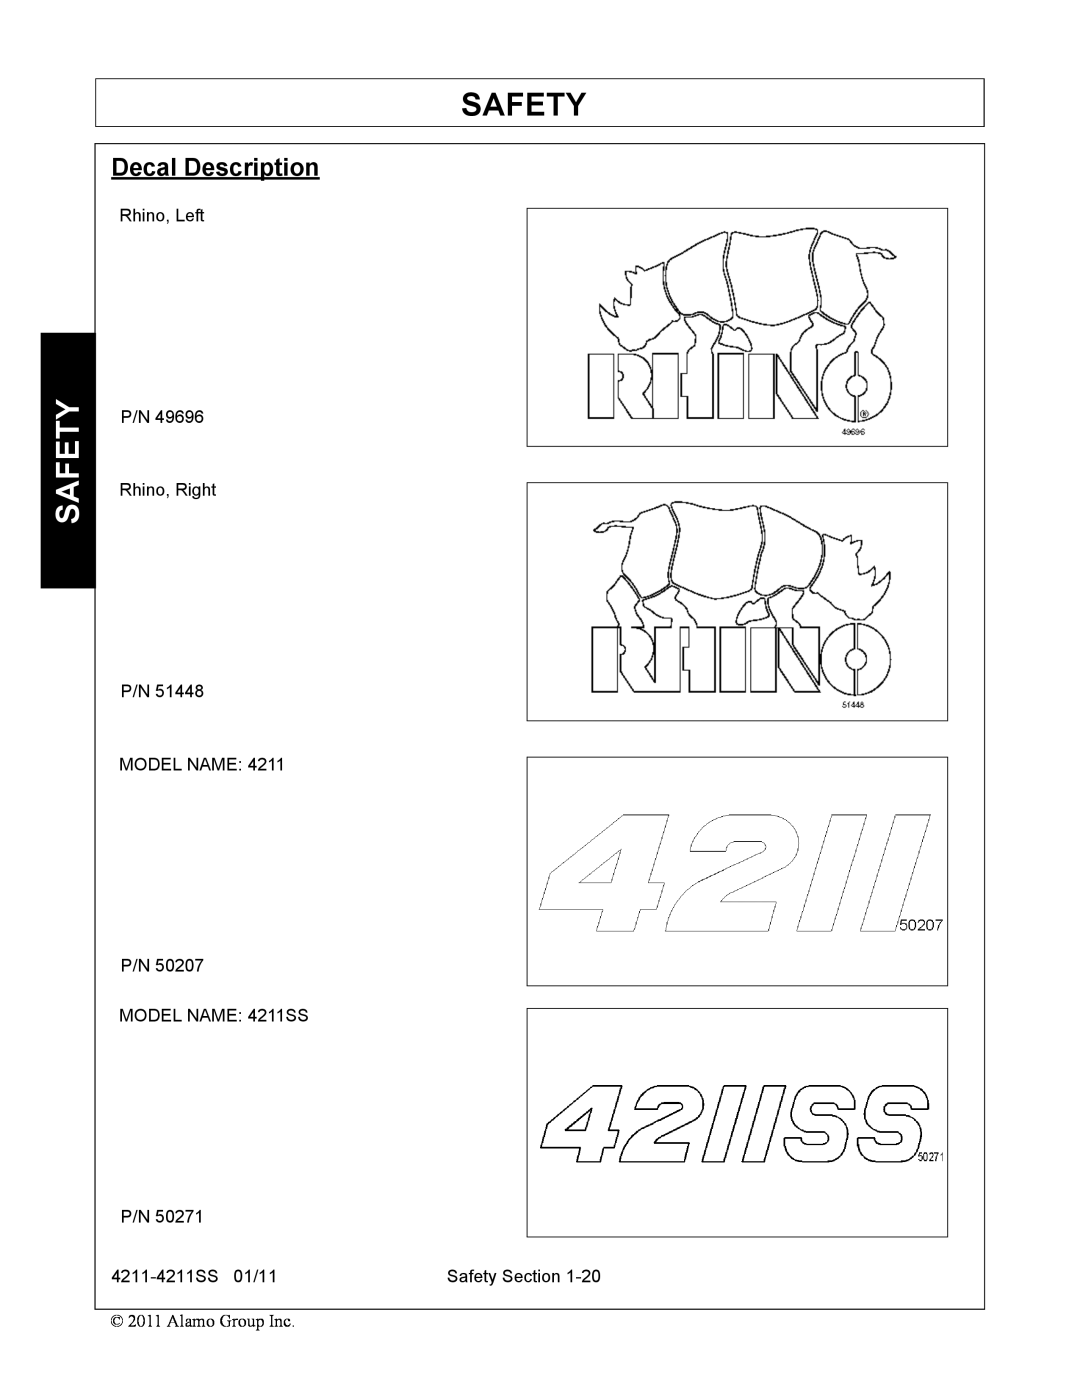 Servis-Rhino 4211SS manual Safety, Decal Description 